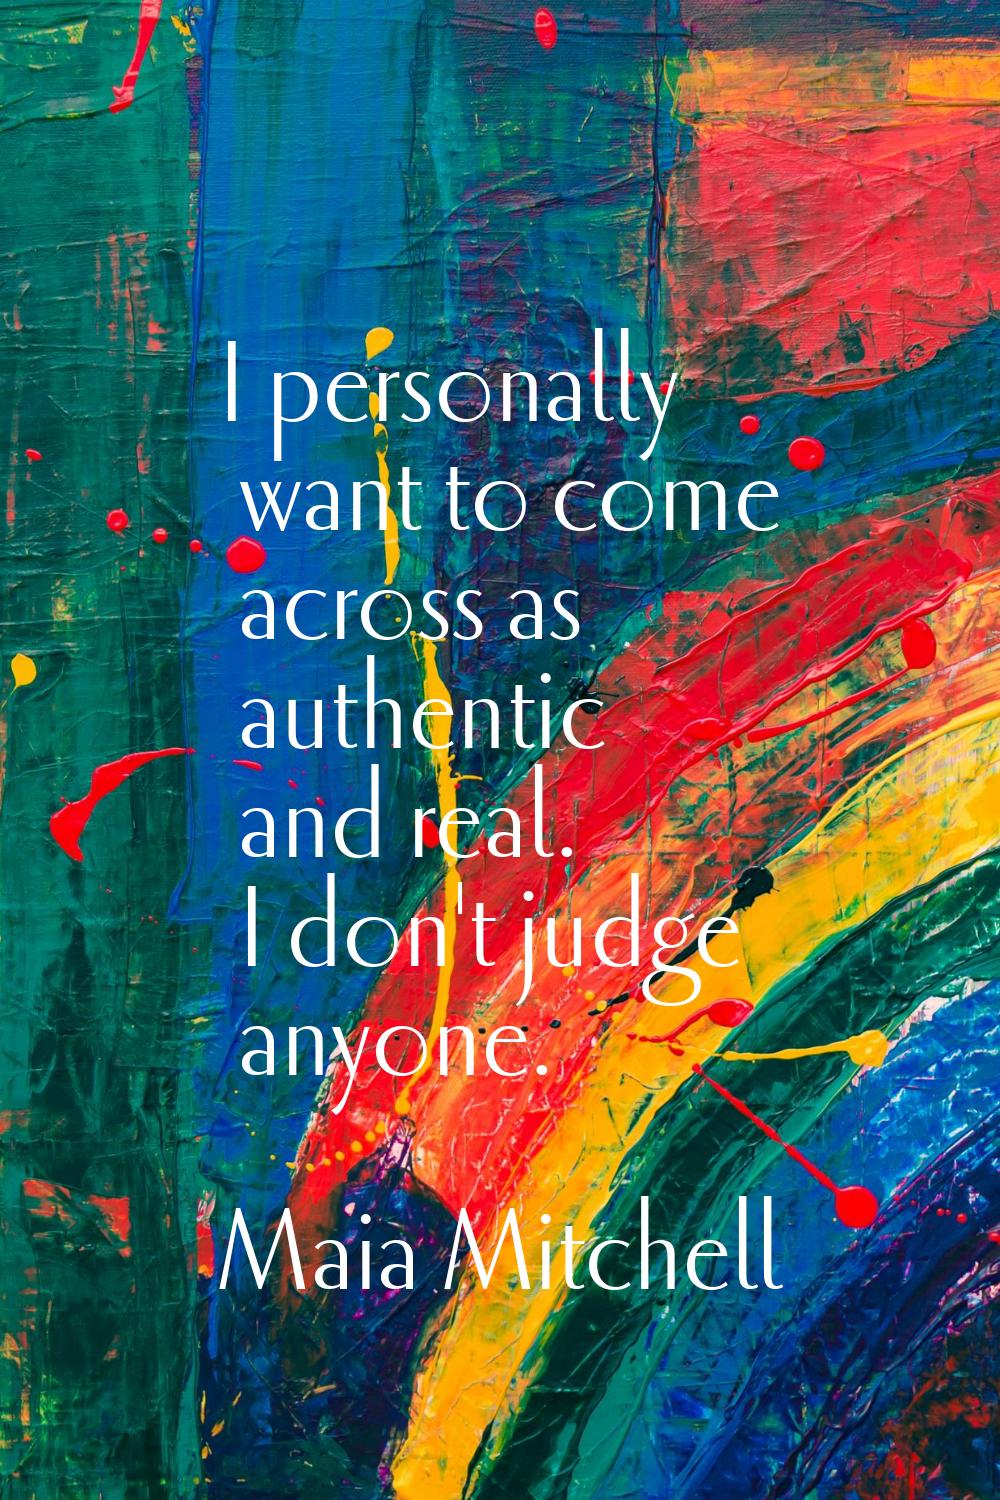 I personally want to come across as authentic and real. I don't judge anyone.